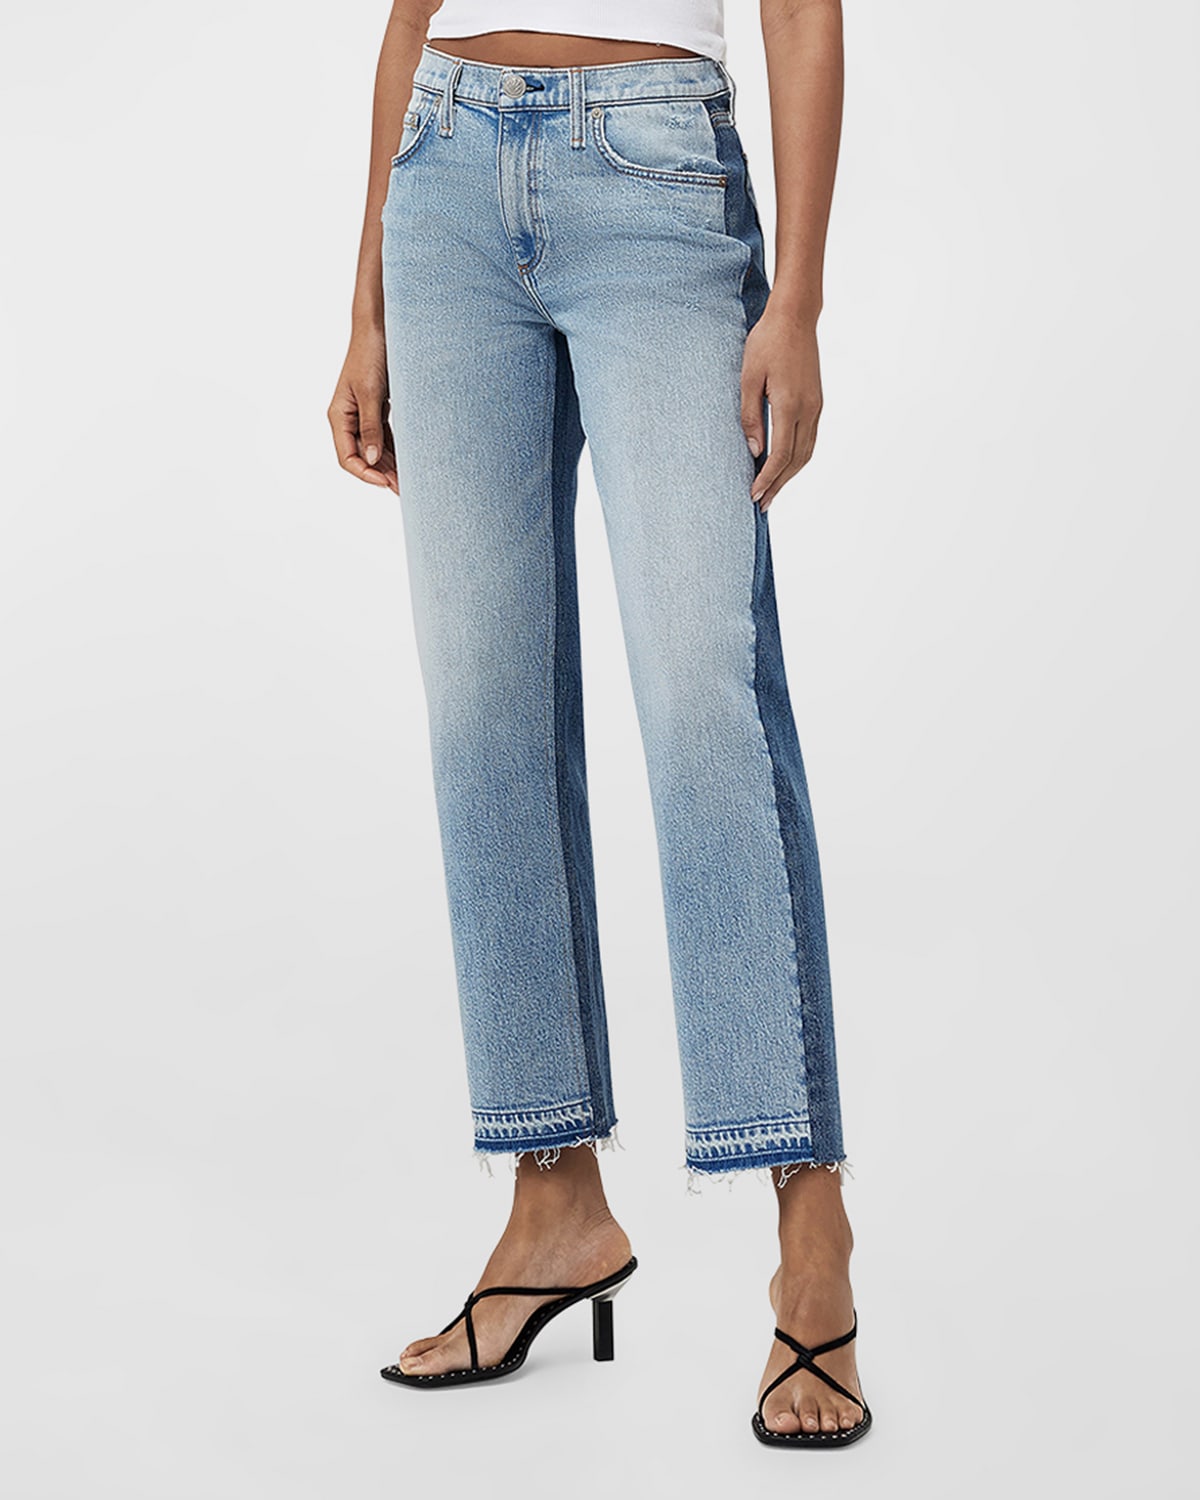 Harlow Two-Tone Straight Jeans